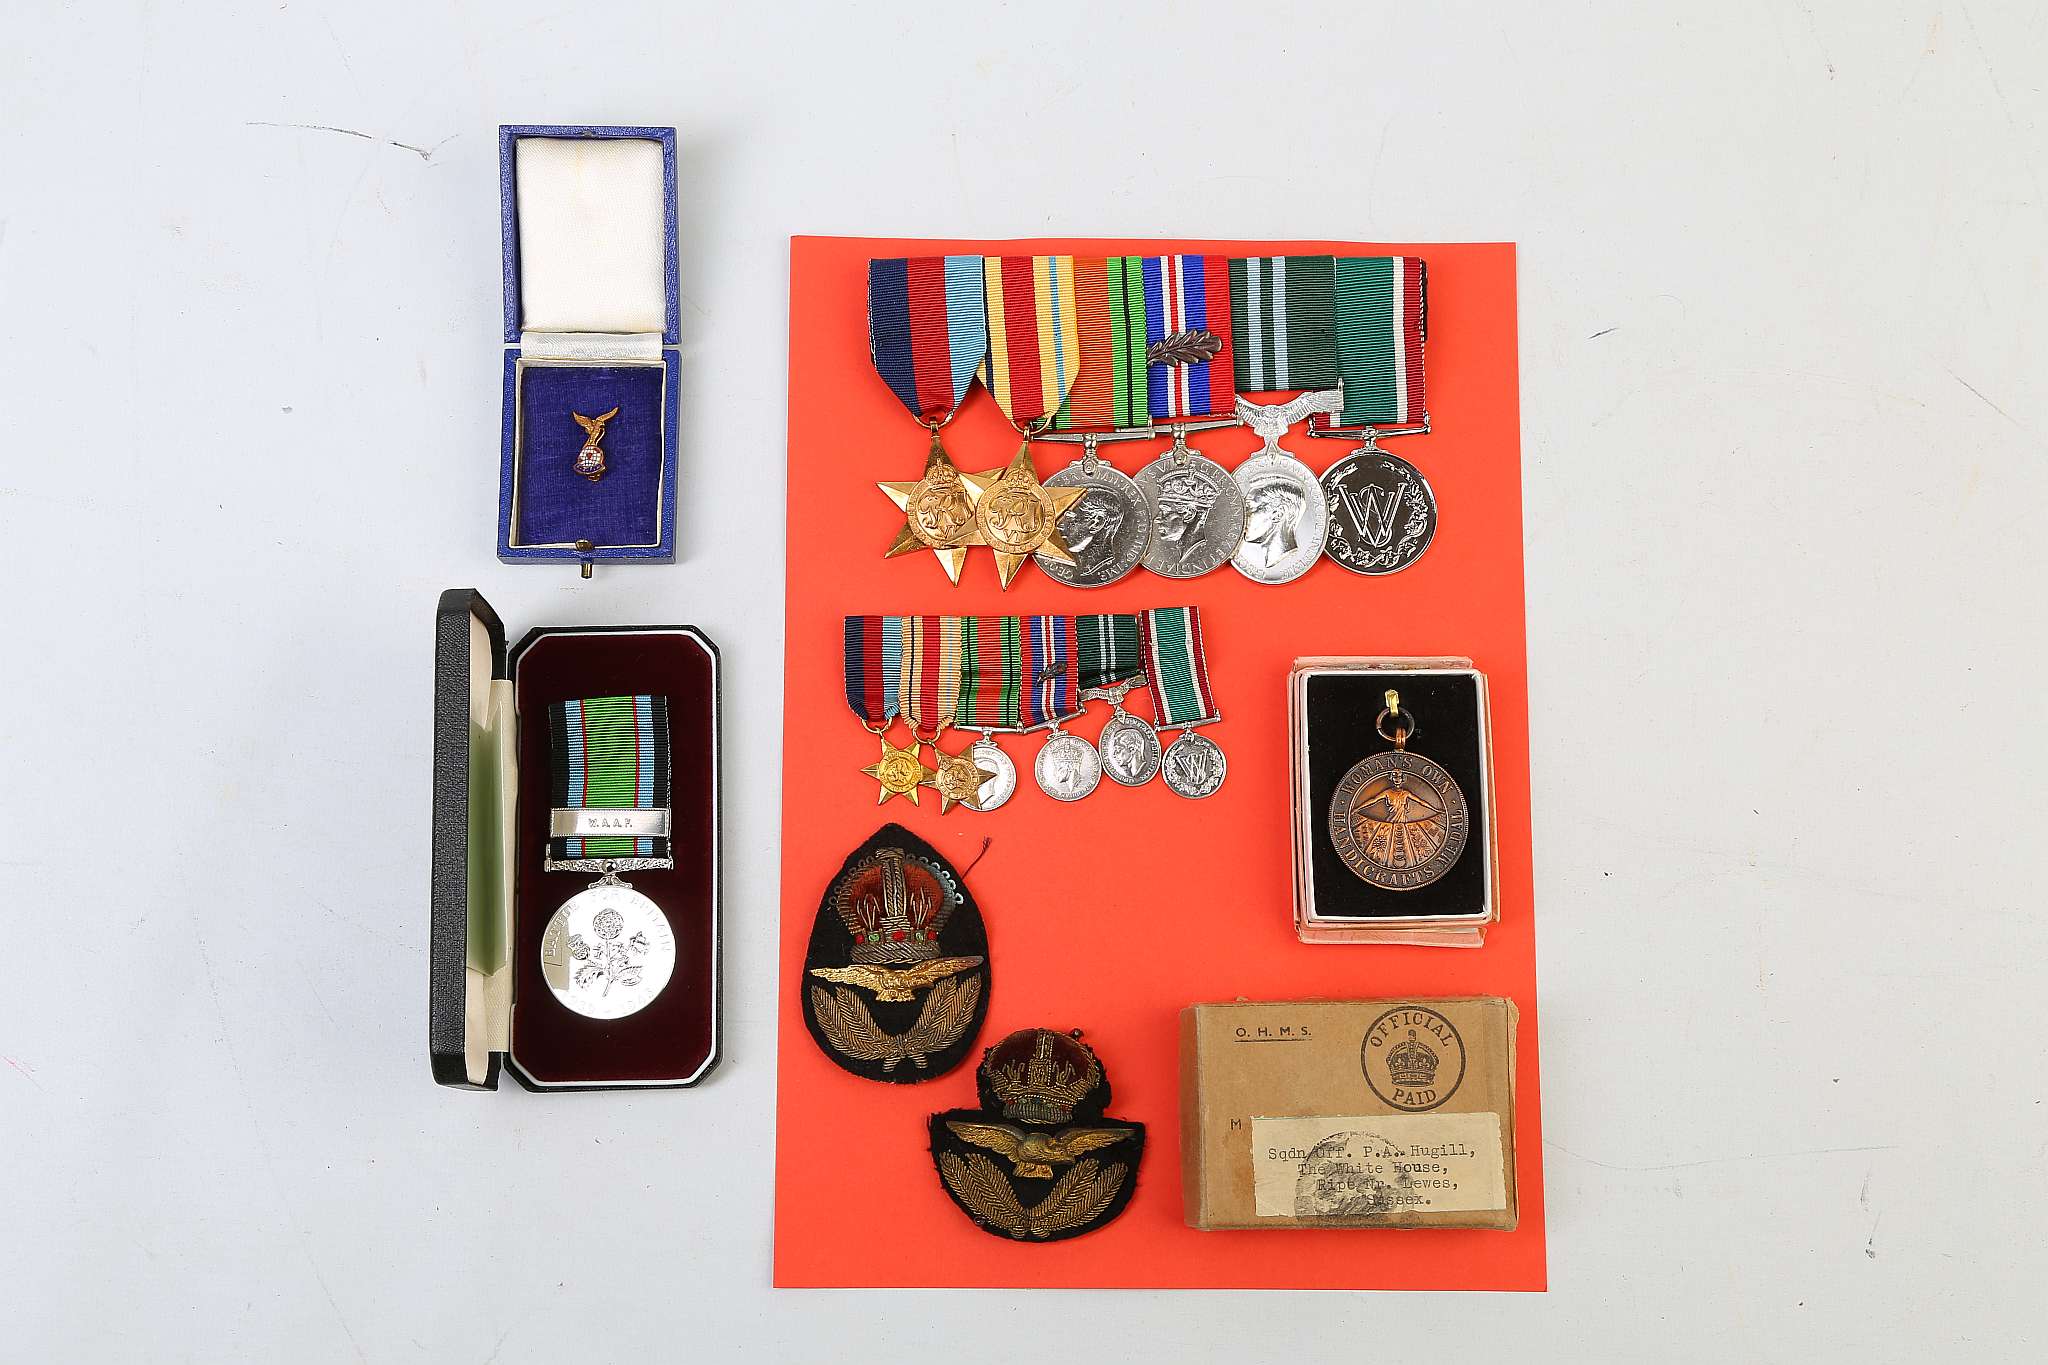 A RARE COLLECTION OF WWII WAAF MEDALS, miniatures and paperwork awarded to Squadron Officer P. A. - Image 2 of 3